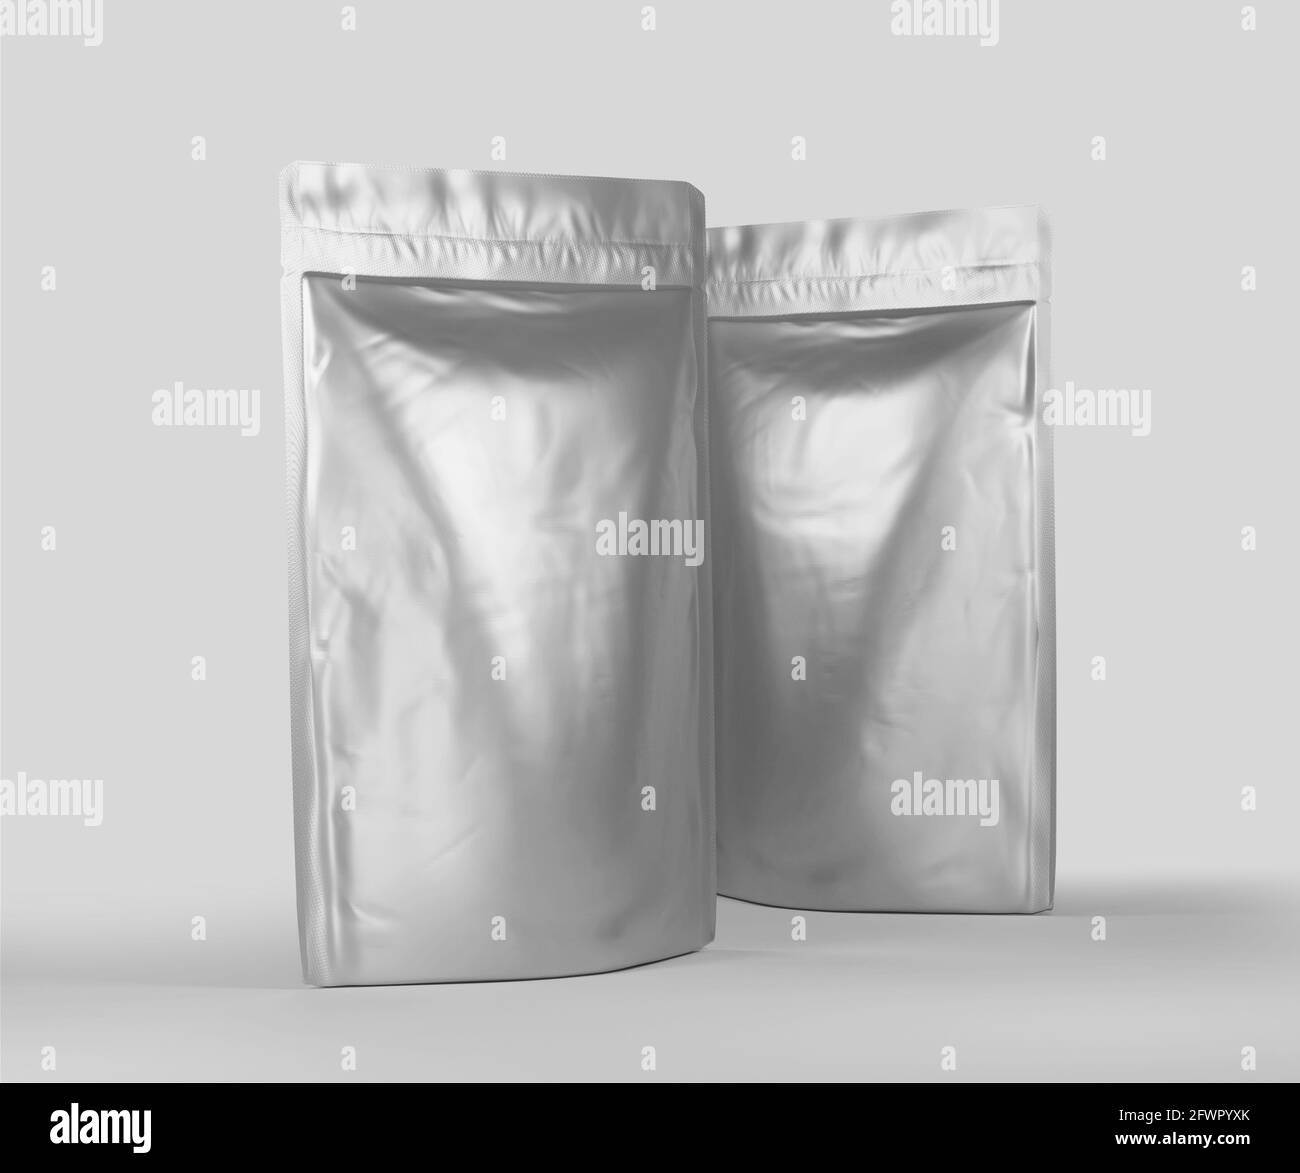 Blank Foil plastic pouch coffee bag, white Aluminium coffee or juice package 3d rendering isolated on light background Stock Photo